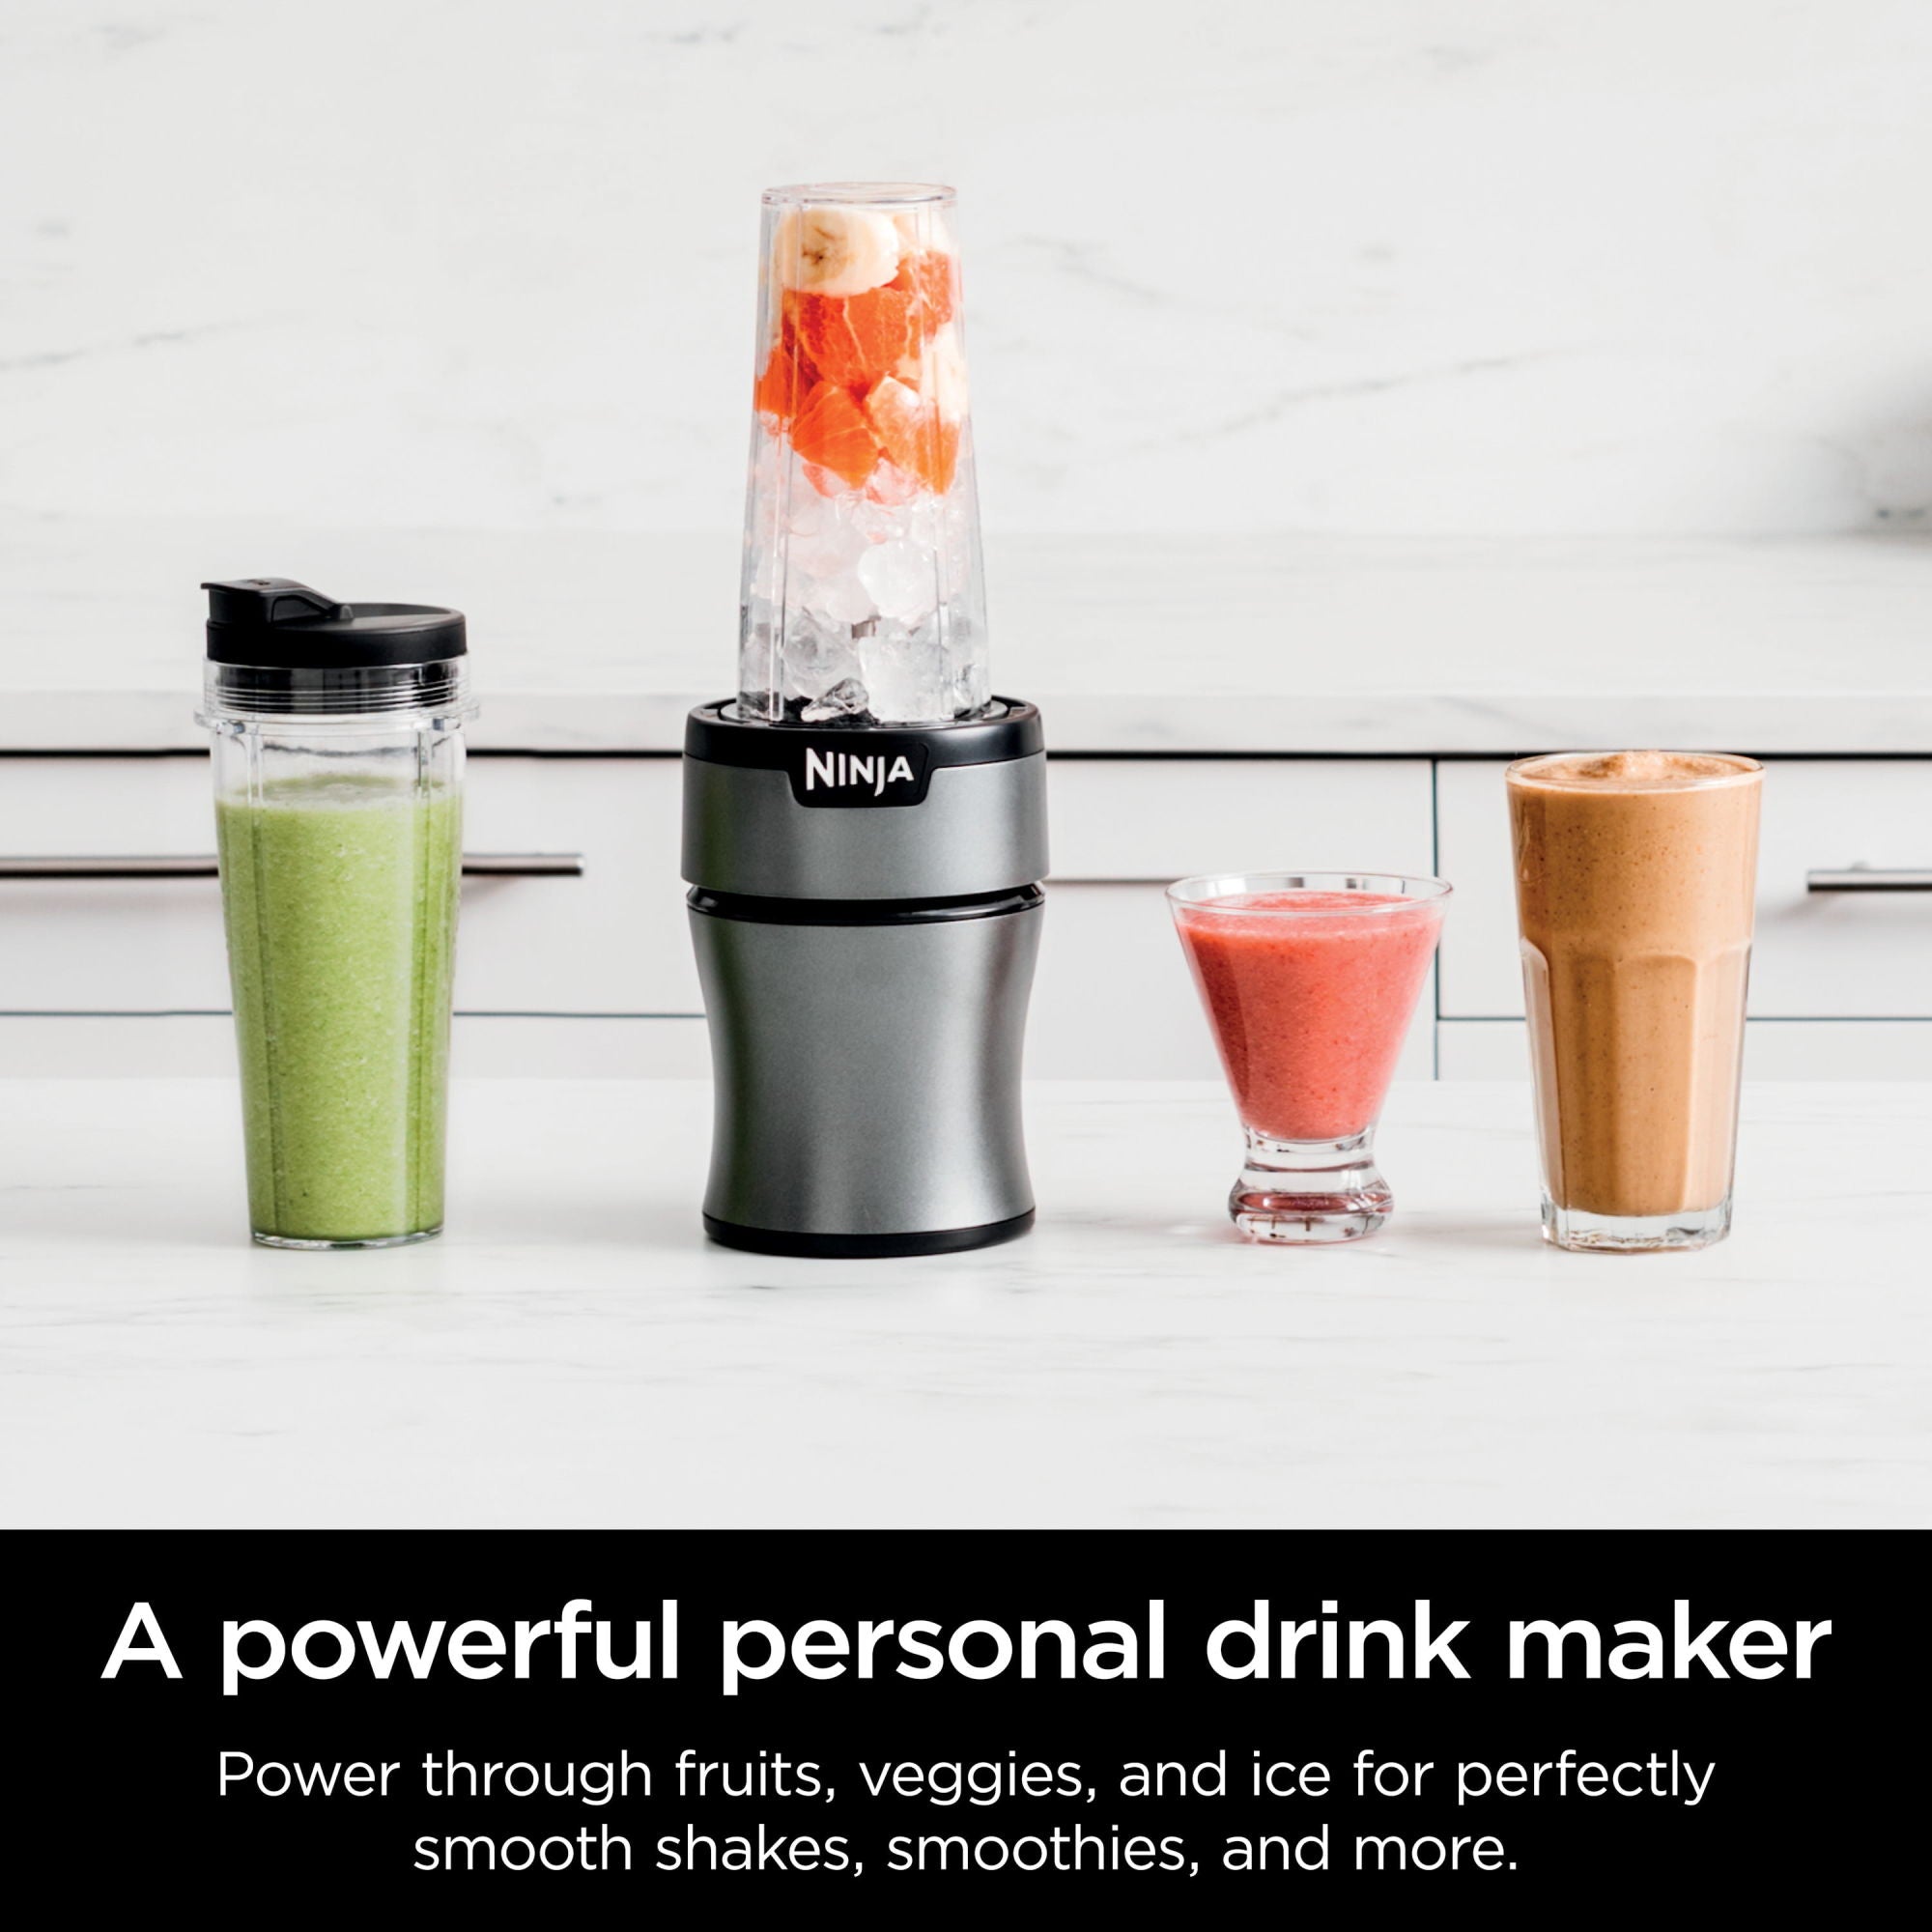 A Nutri-Blender BN300 700-Watt Personal Blender, 2 20 oz Dishwasher-Safe To-Go Cups with a cup and a lid, perfect for making smoothies.